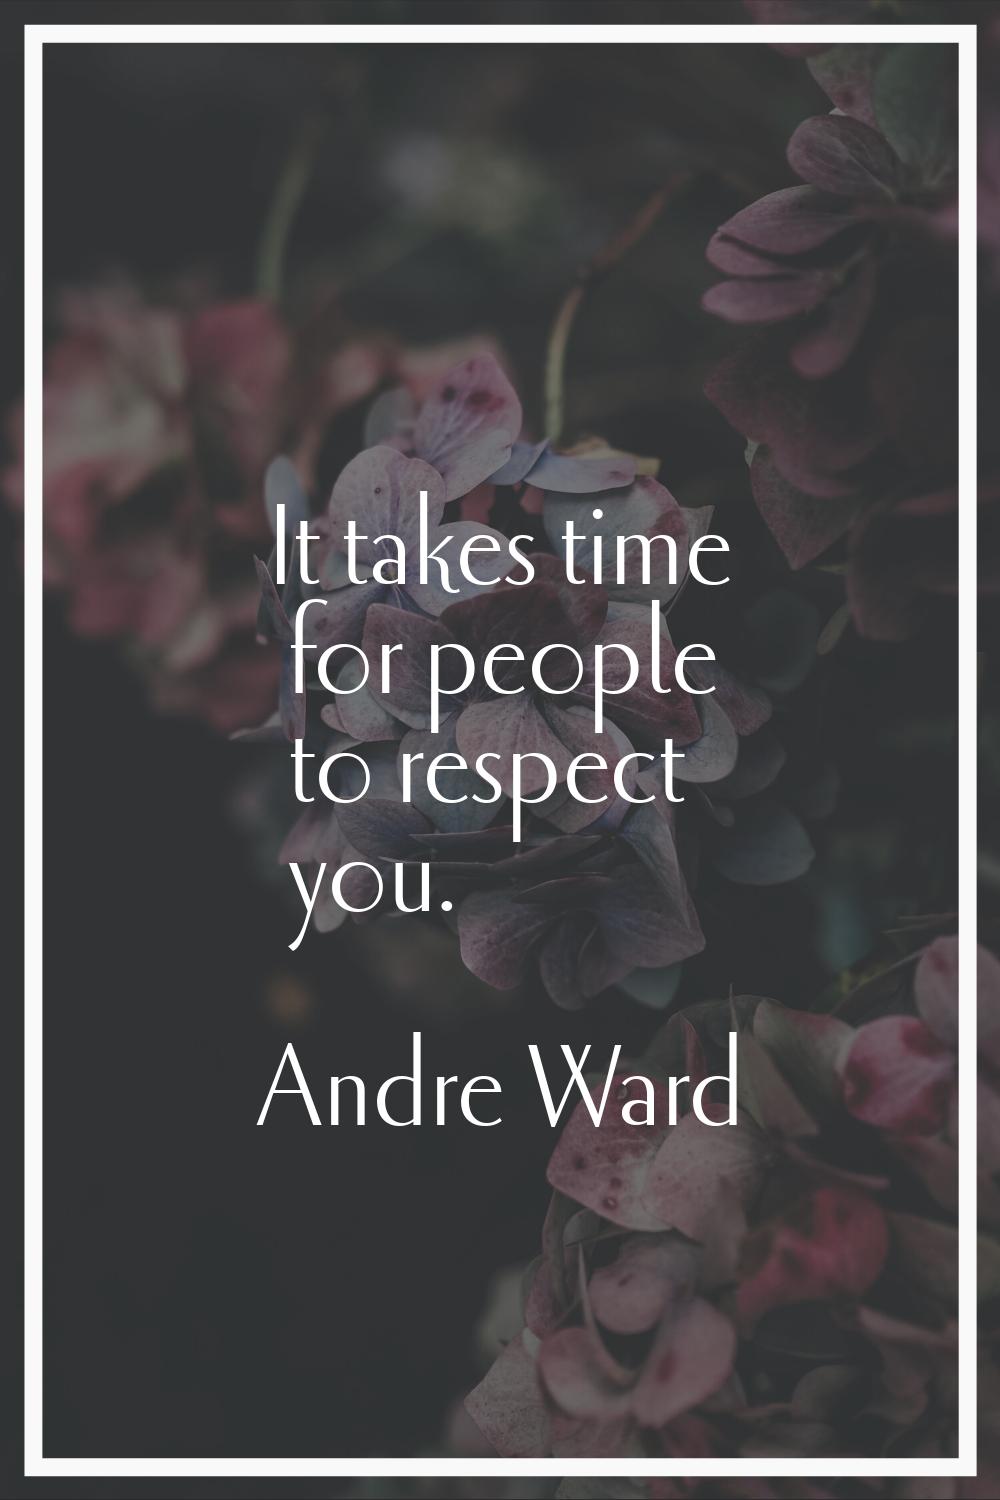 It takes time for people to respect you.